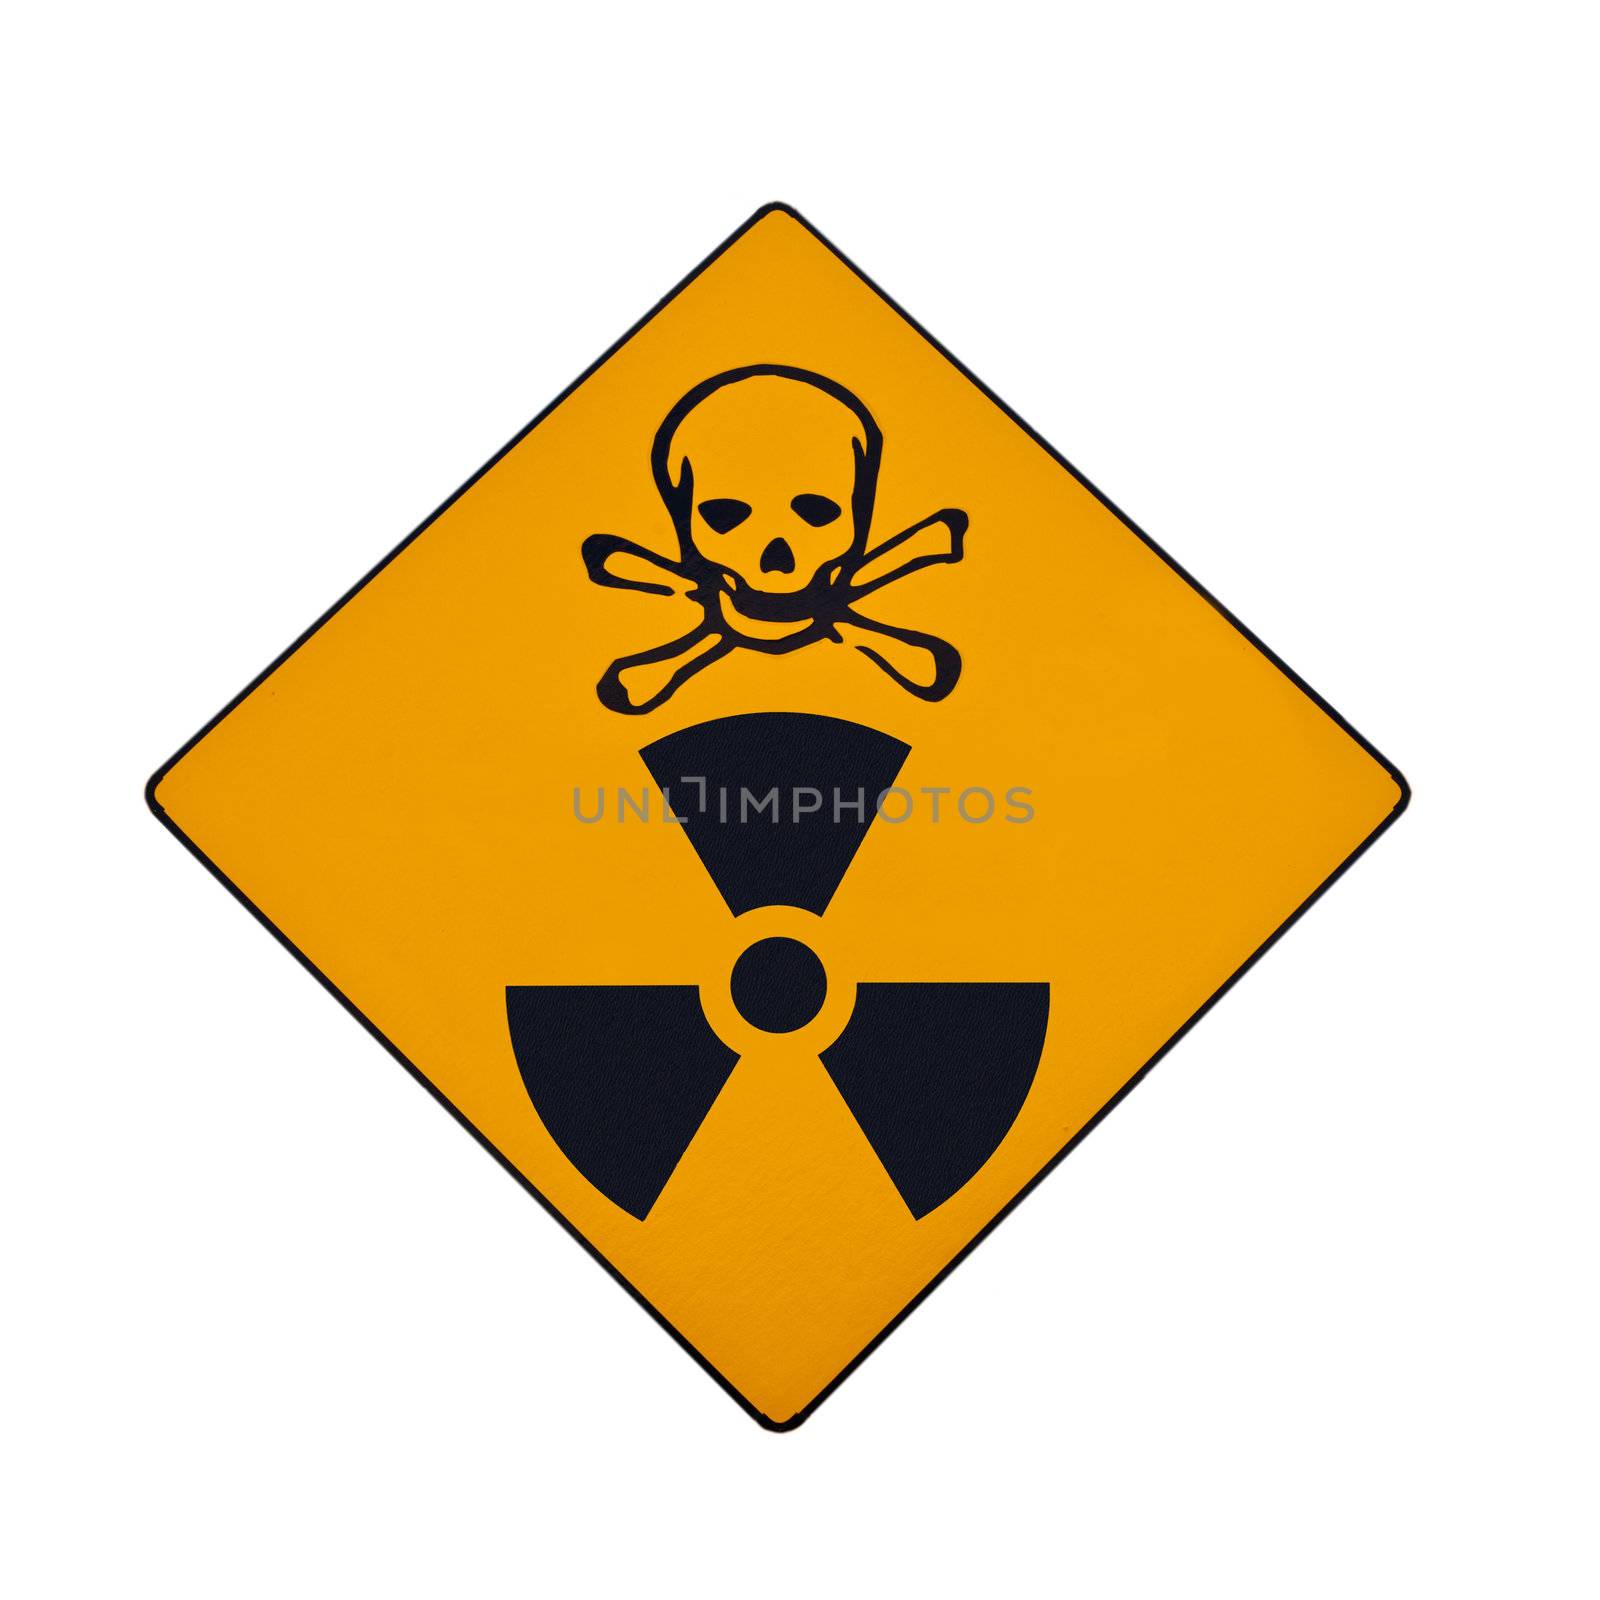 Deadly nuclear radiation warning sign with skull and crossbones isolated on white.